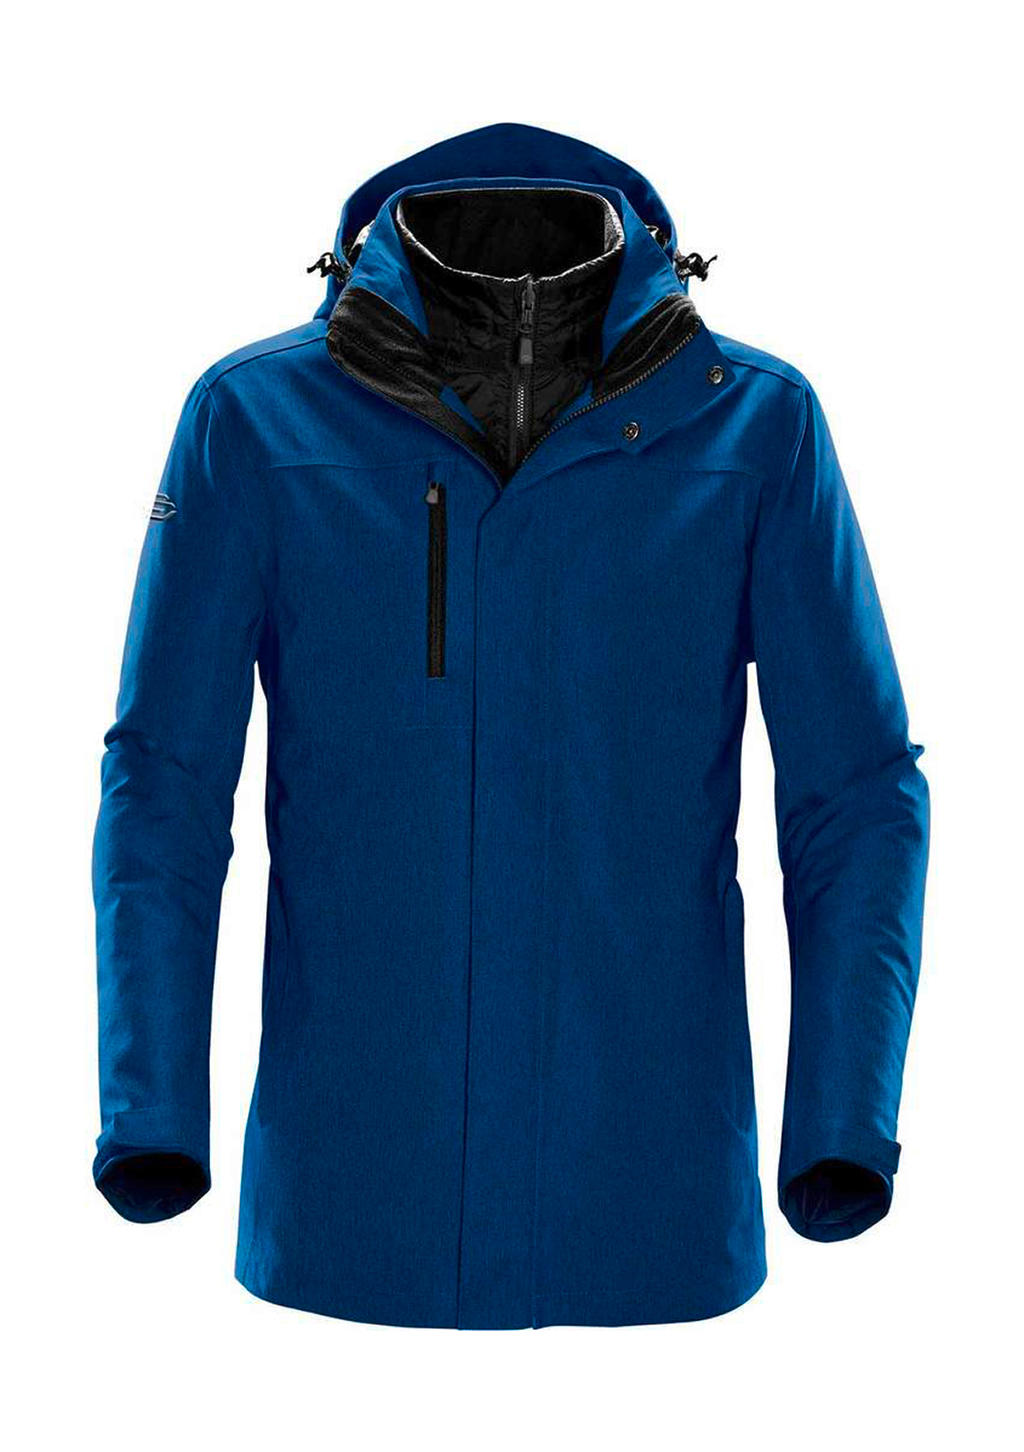  Mens Avalanche System Jacket in Farbe Marine Blue